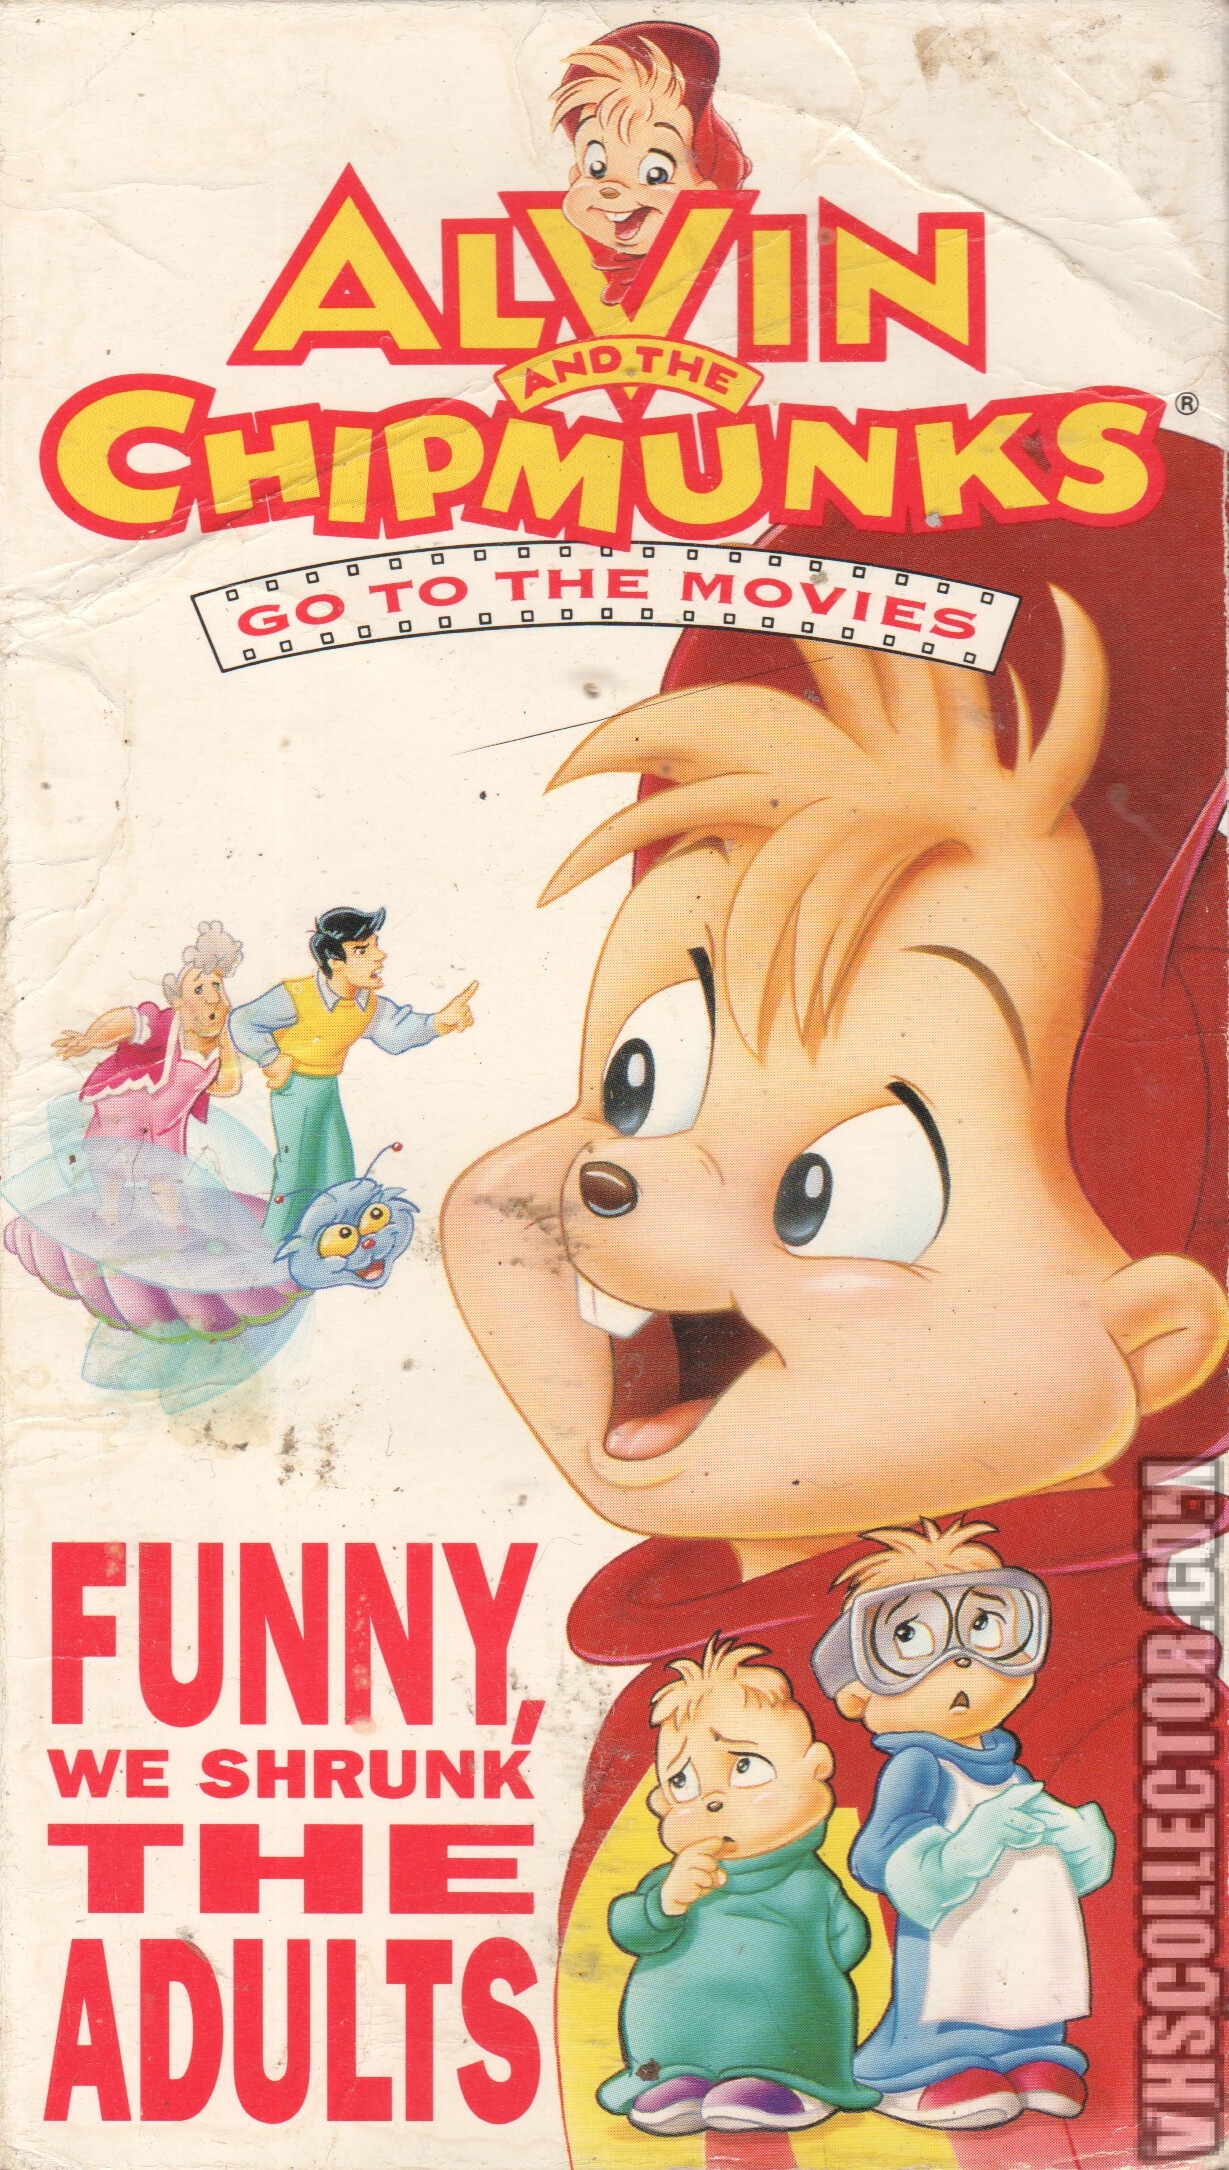 31795_Alvin%2520And%2520The%2520Chipmunks%2520Funny%2520We%2520Shrunk%2520The%2520Adults%2520VHS%2520Front%2520Cover.jpg